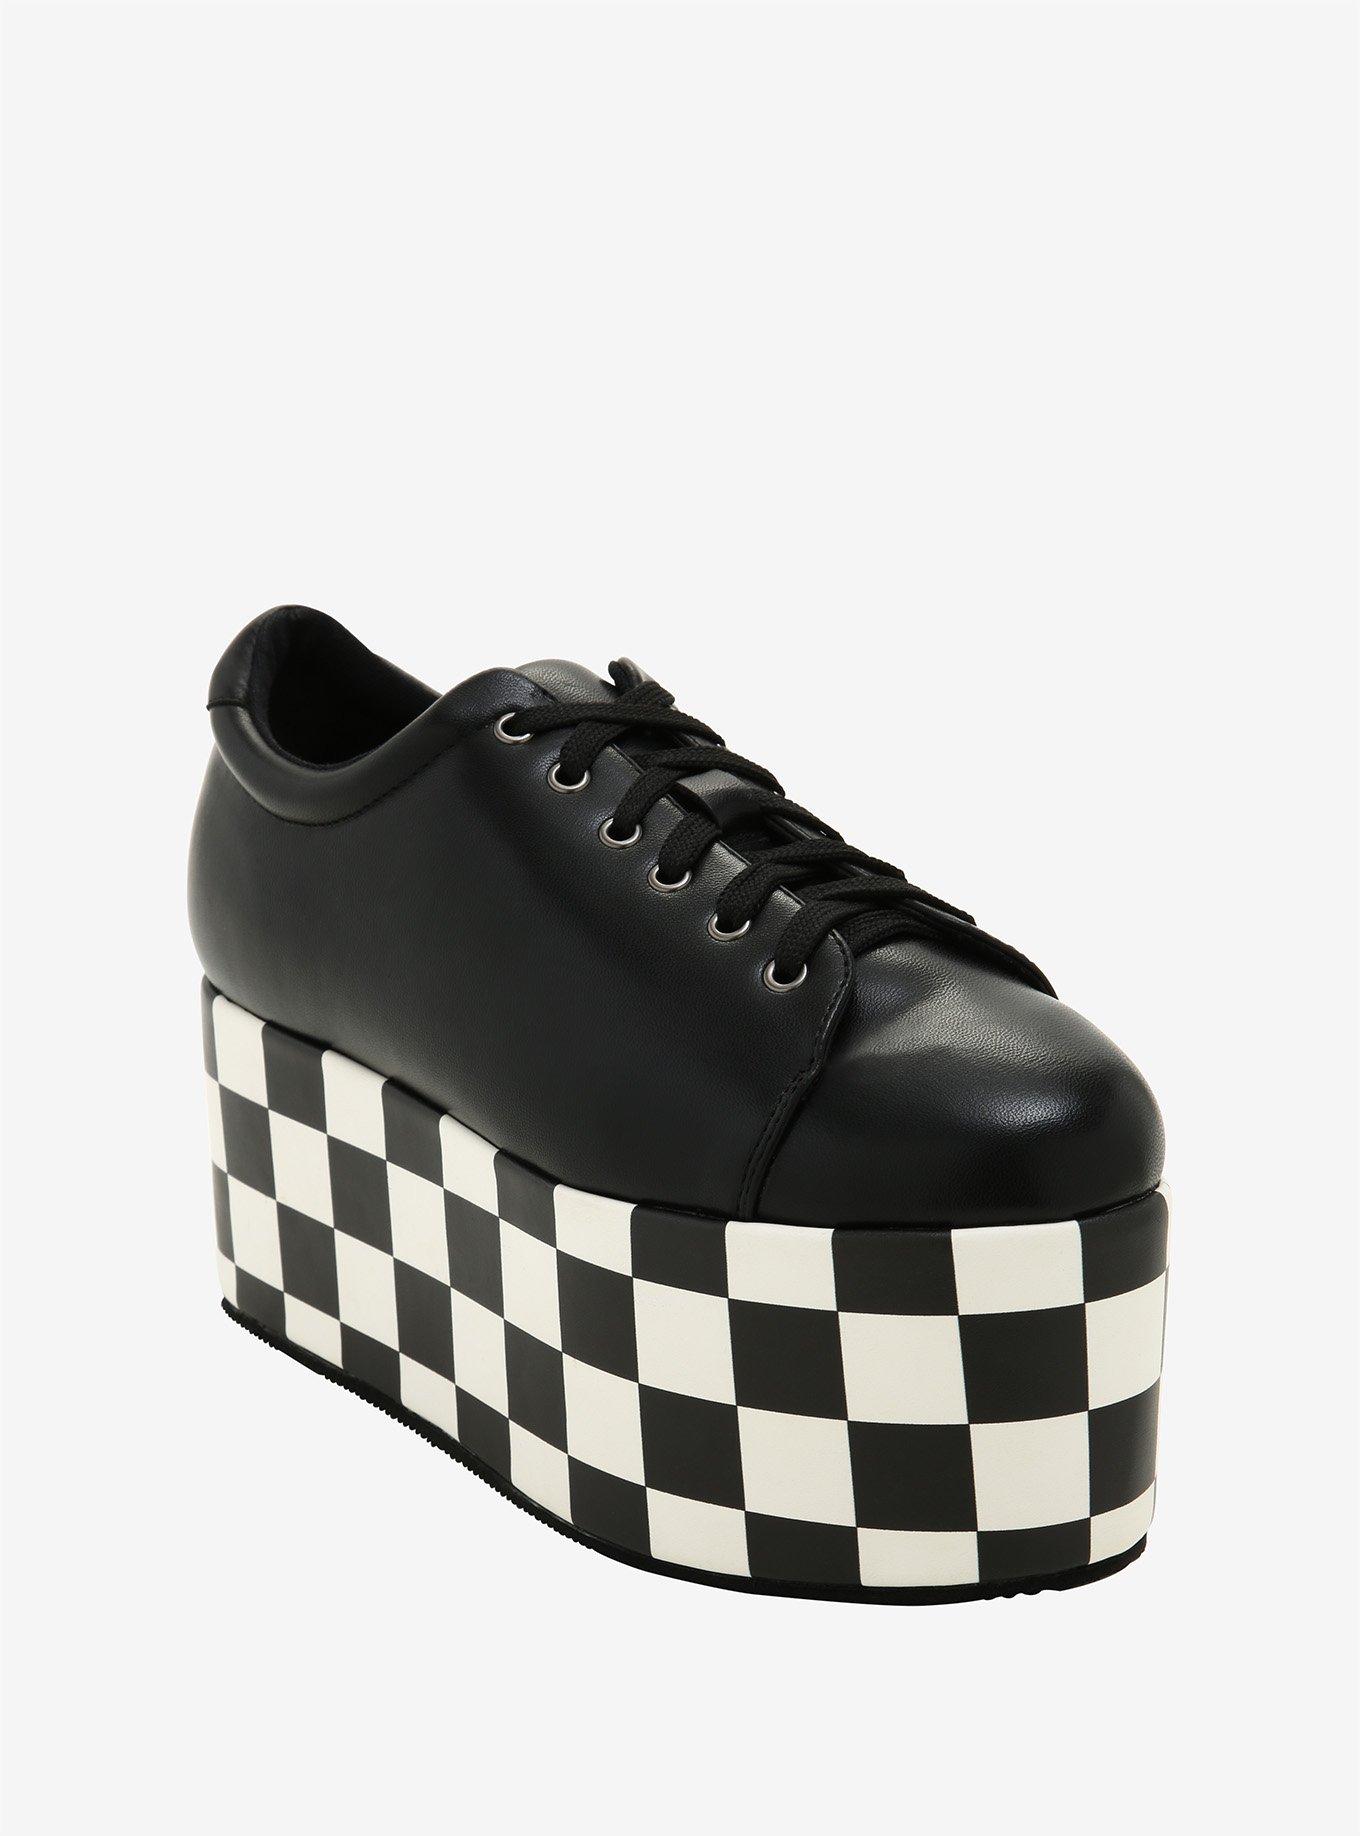 Checkered Sole Platform Sneakers, MULTI, hi-res